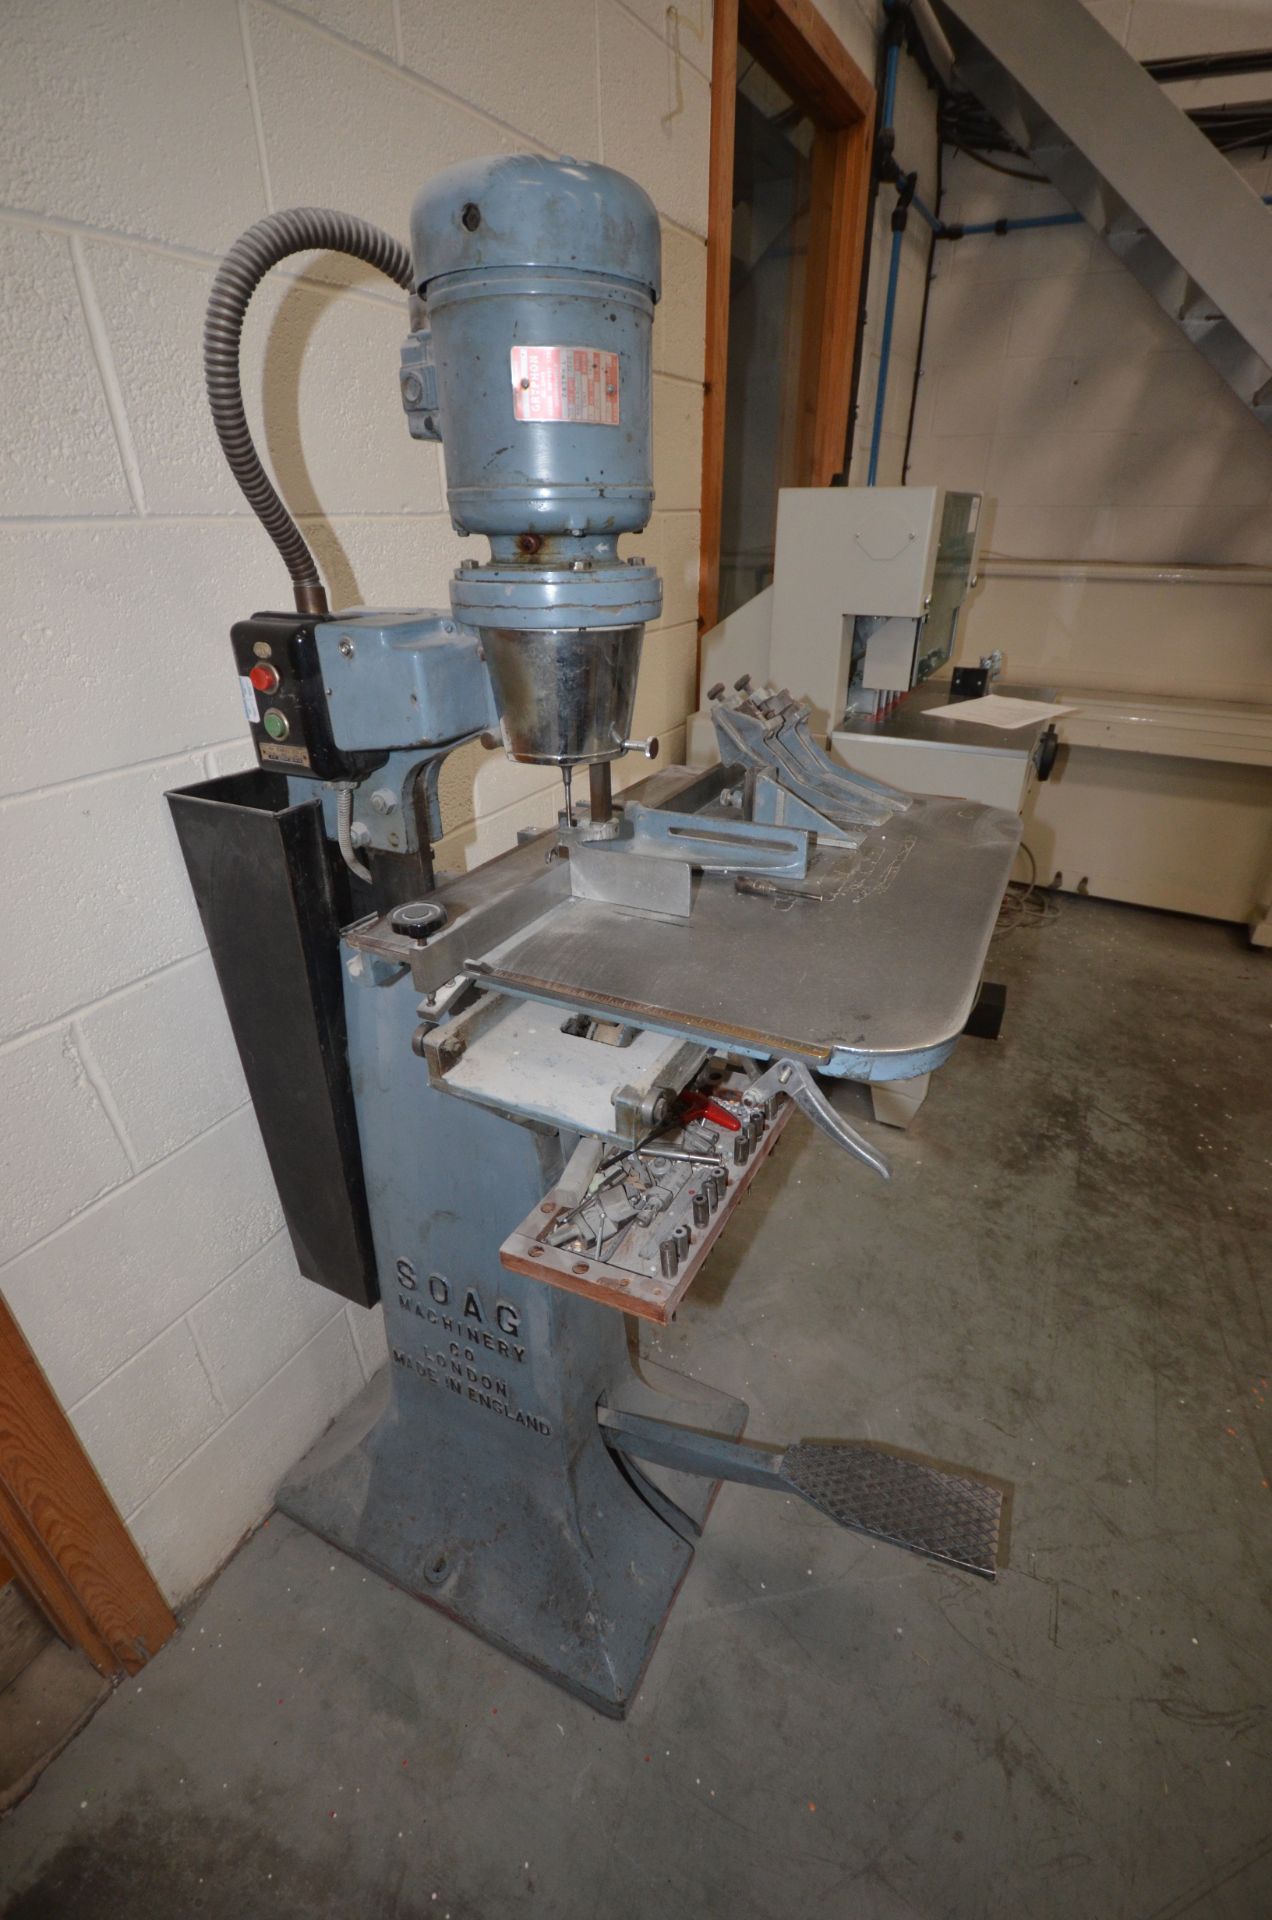 Soag single head pedestal mounted paper drill - Image 2 of 3